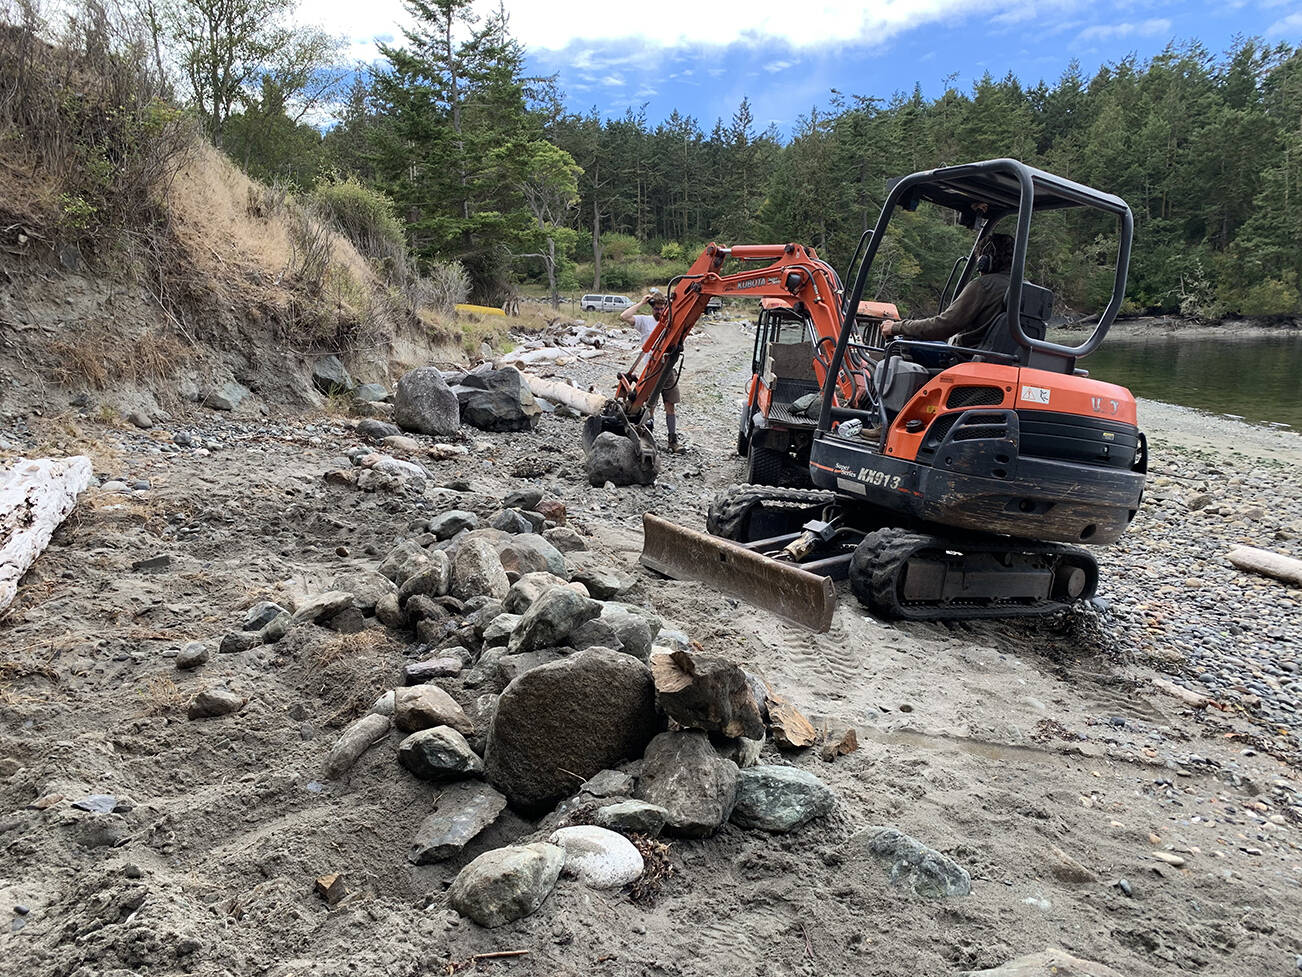 NWC removes unnecessary rock armor from upper beach habitat at Salmon Point community beach. (Contributed photo)